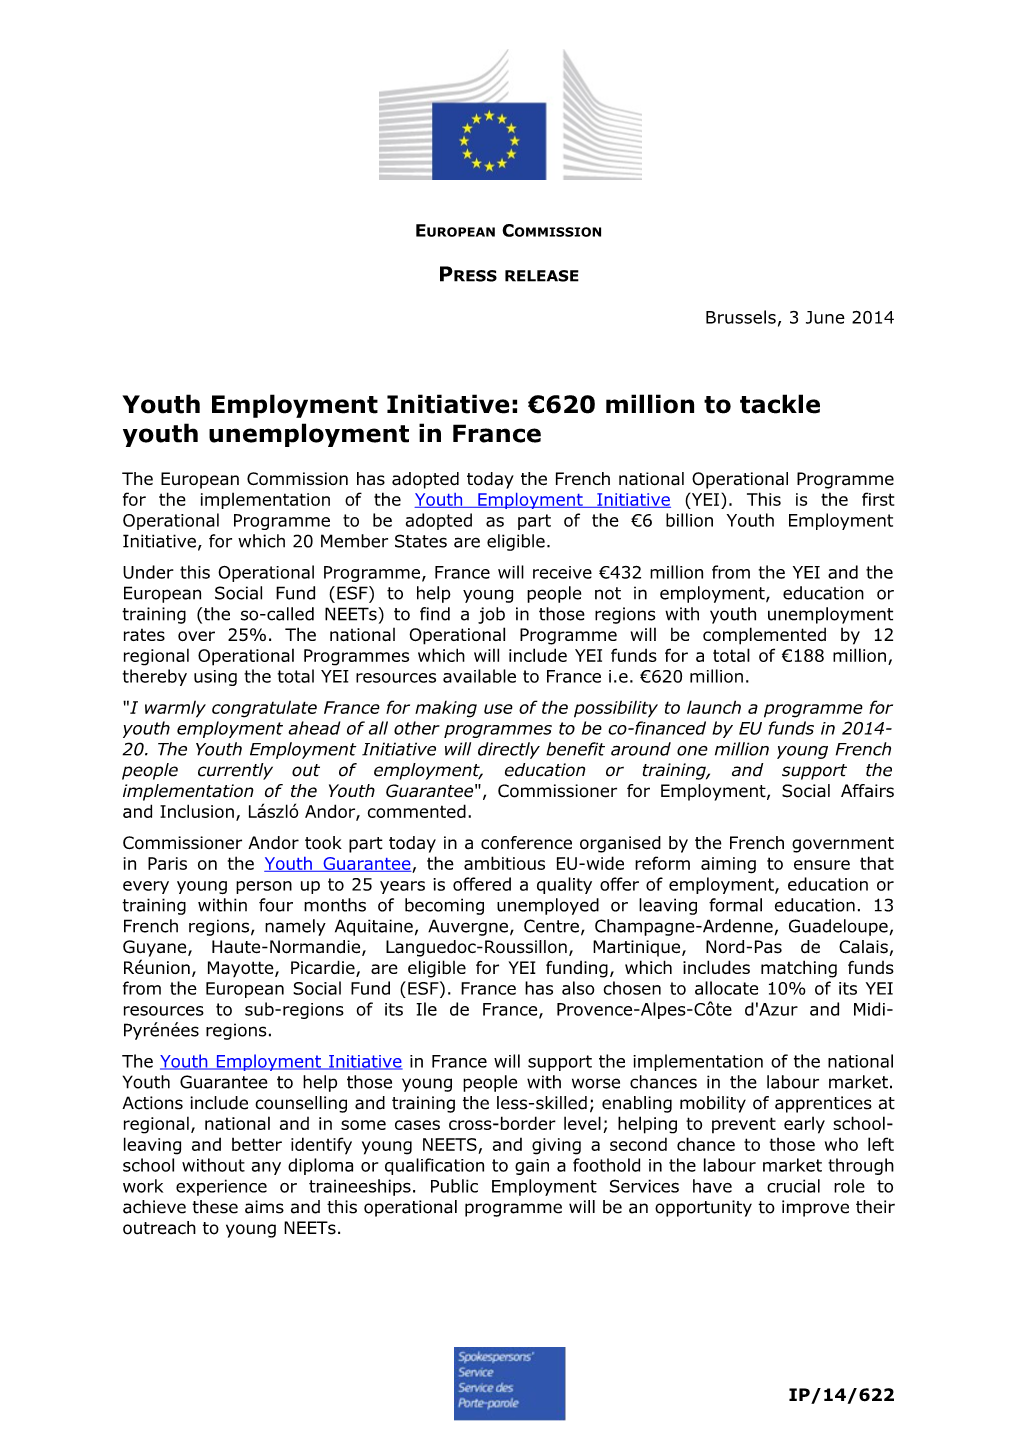 Youth Employment Initiative: 620 Million to Tackle Youth Unemployment in France